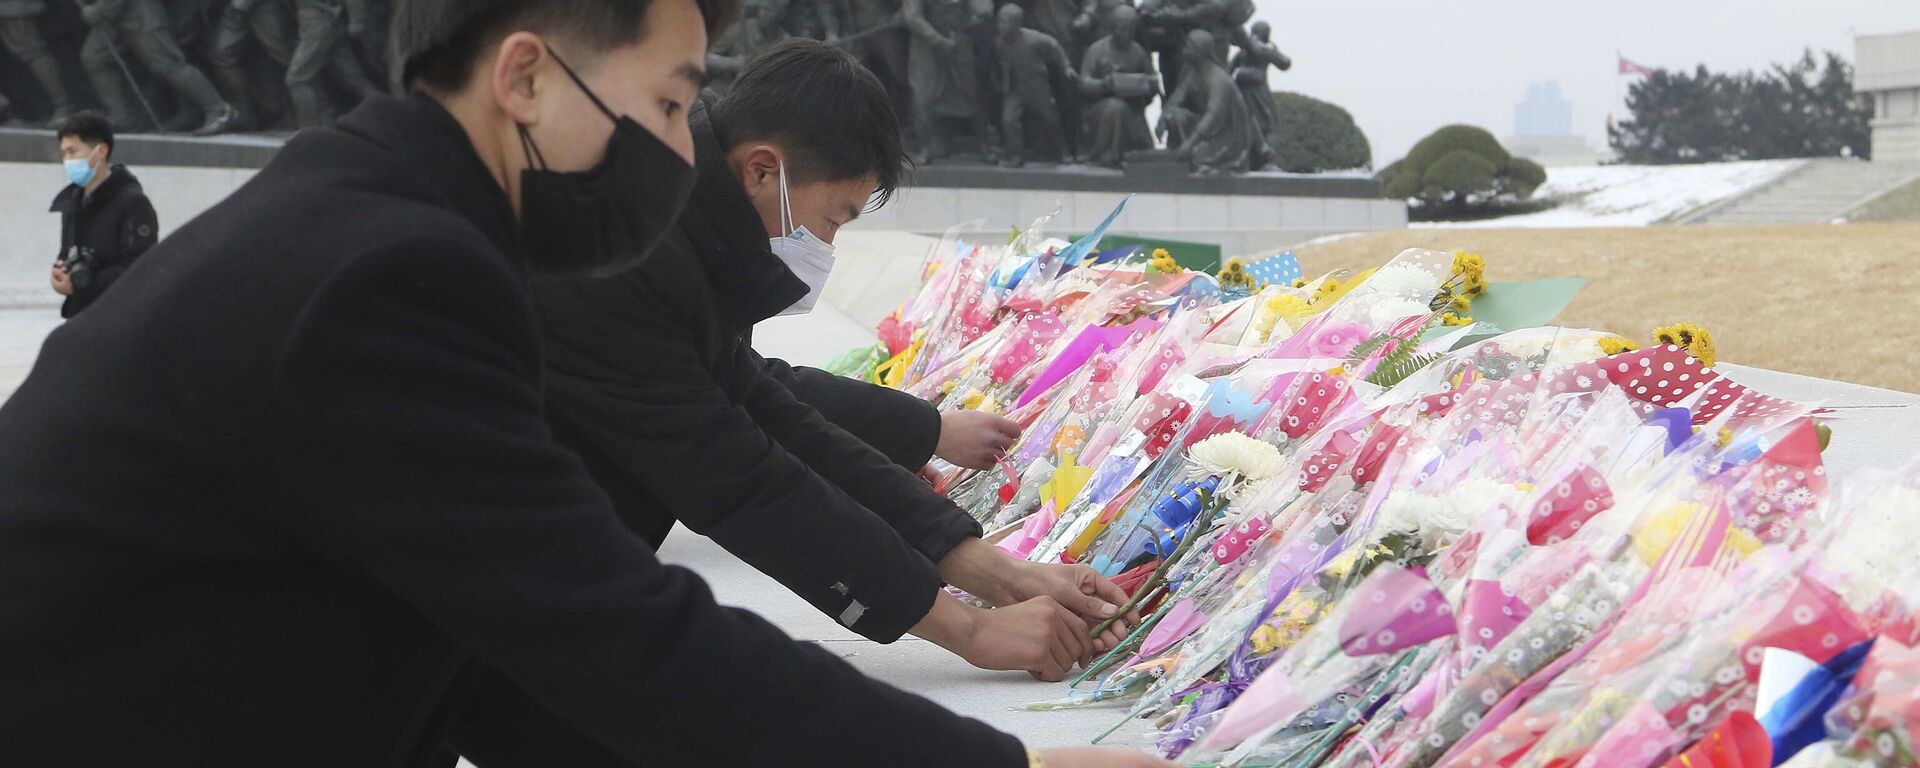 North Korean people visit and pay respect to the statues of late leaders Kim Il Sung and Kim Jong Il on Mansu Hill in Pyongyang, North Korea Sunday, Jan. 22, 2023 on the occasion of the Lunar New Year.  - Sputnik International, 1920, 17.02.2023